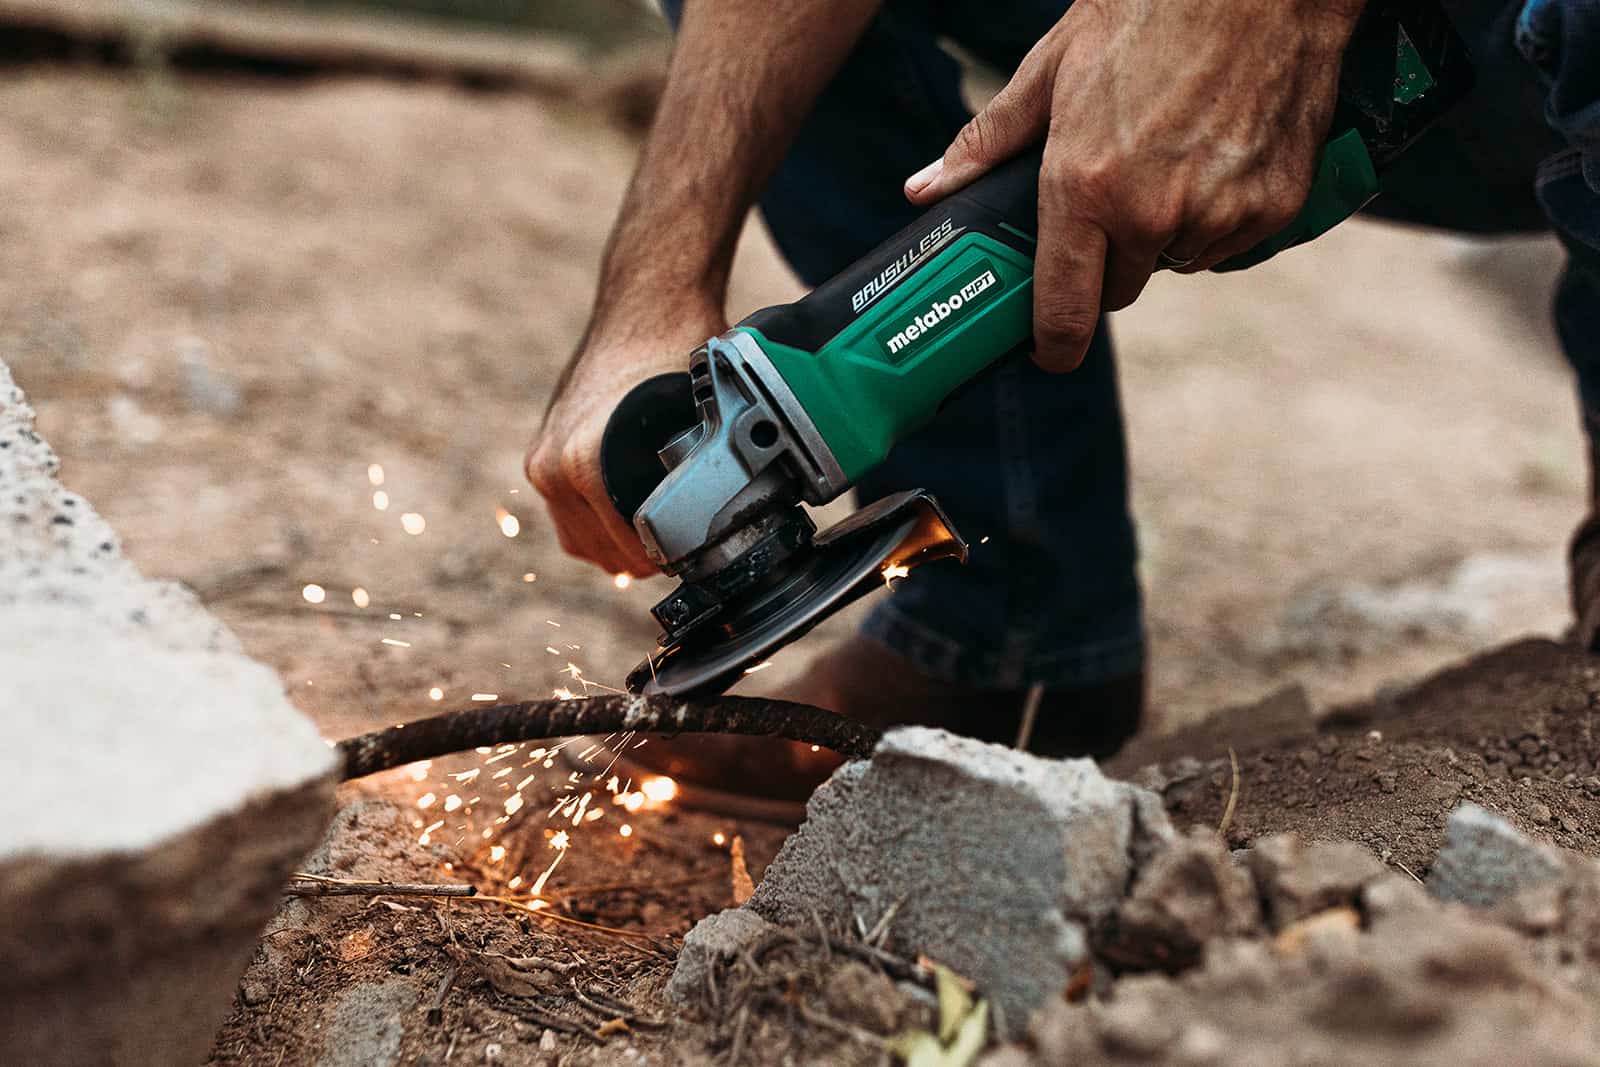 How to cut Concrete with an Angle Grinder?